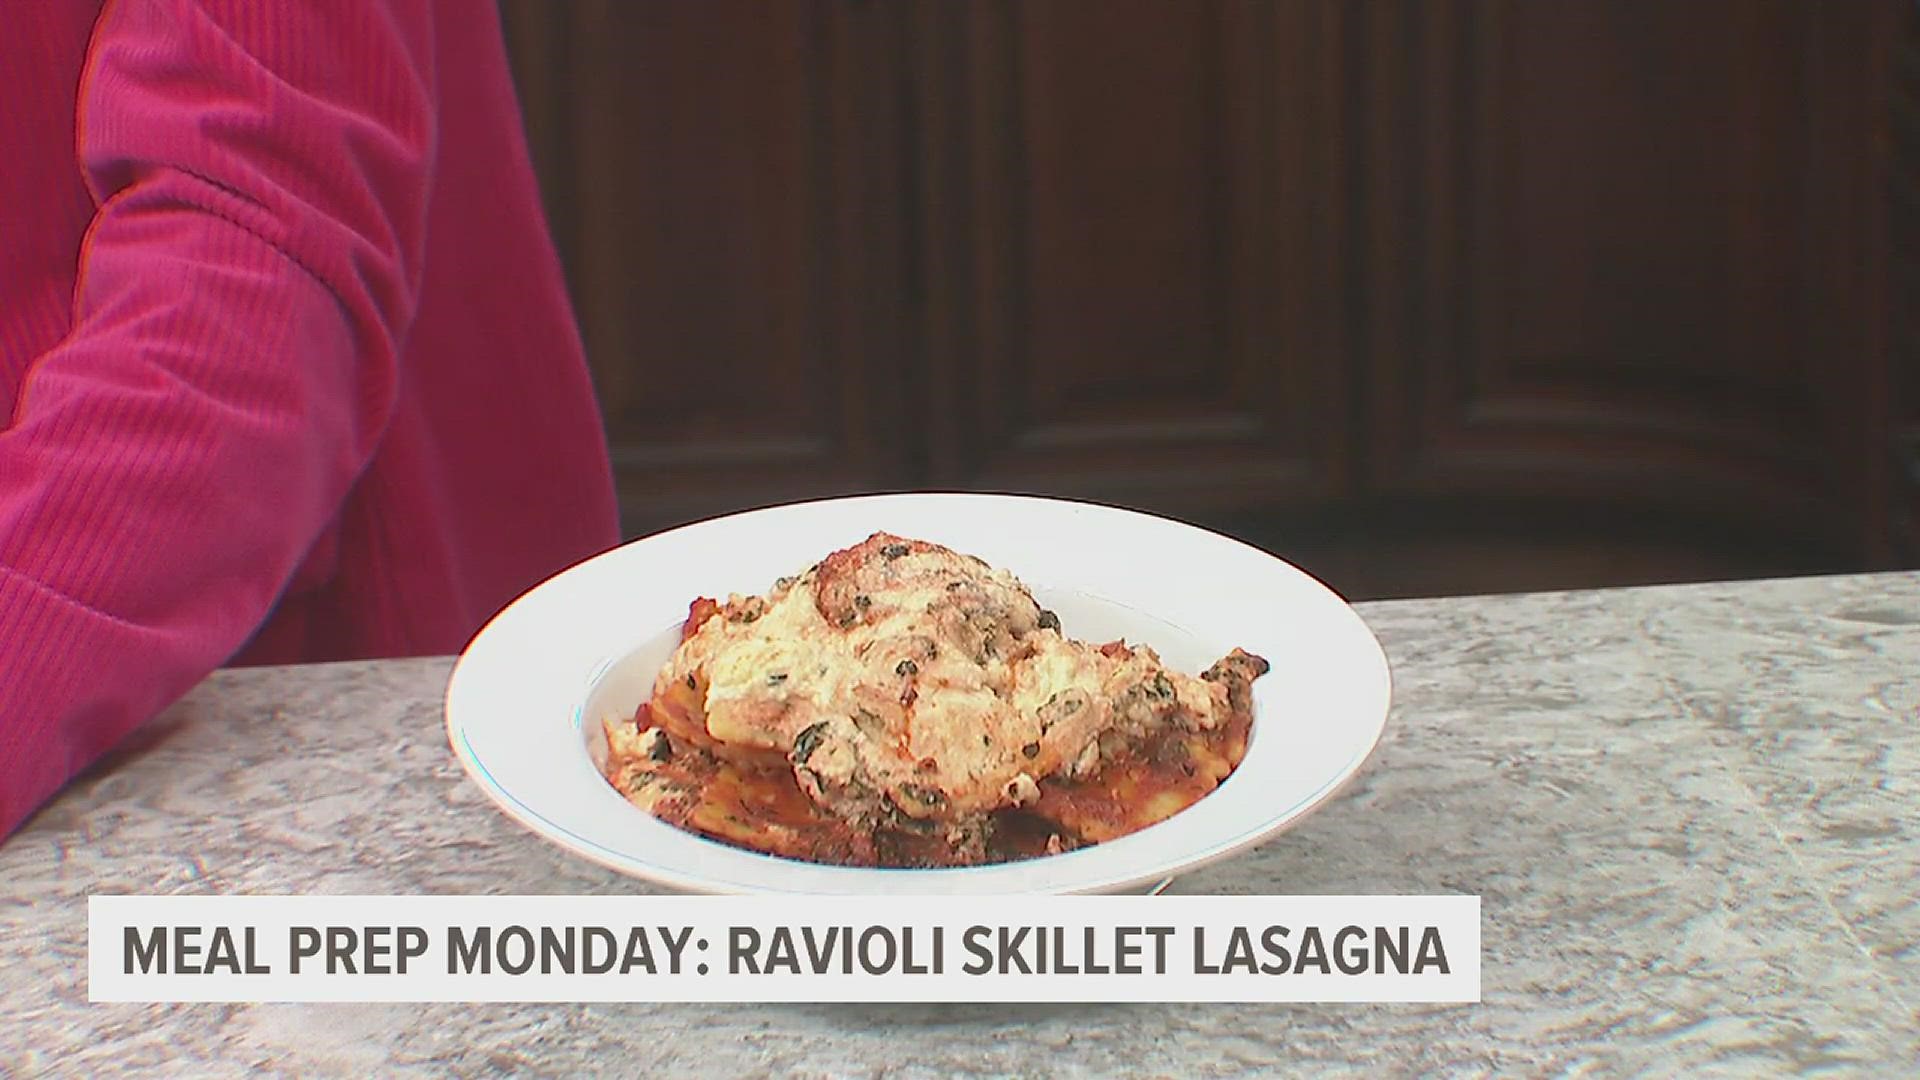 News 8's Shelby Kluver and Hy-Vee Registered Dietician Nina Struss show you how to chef up some delicious ravioli skillet lasagna!